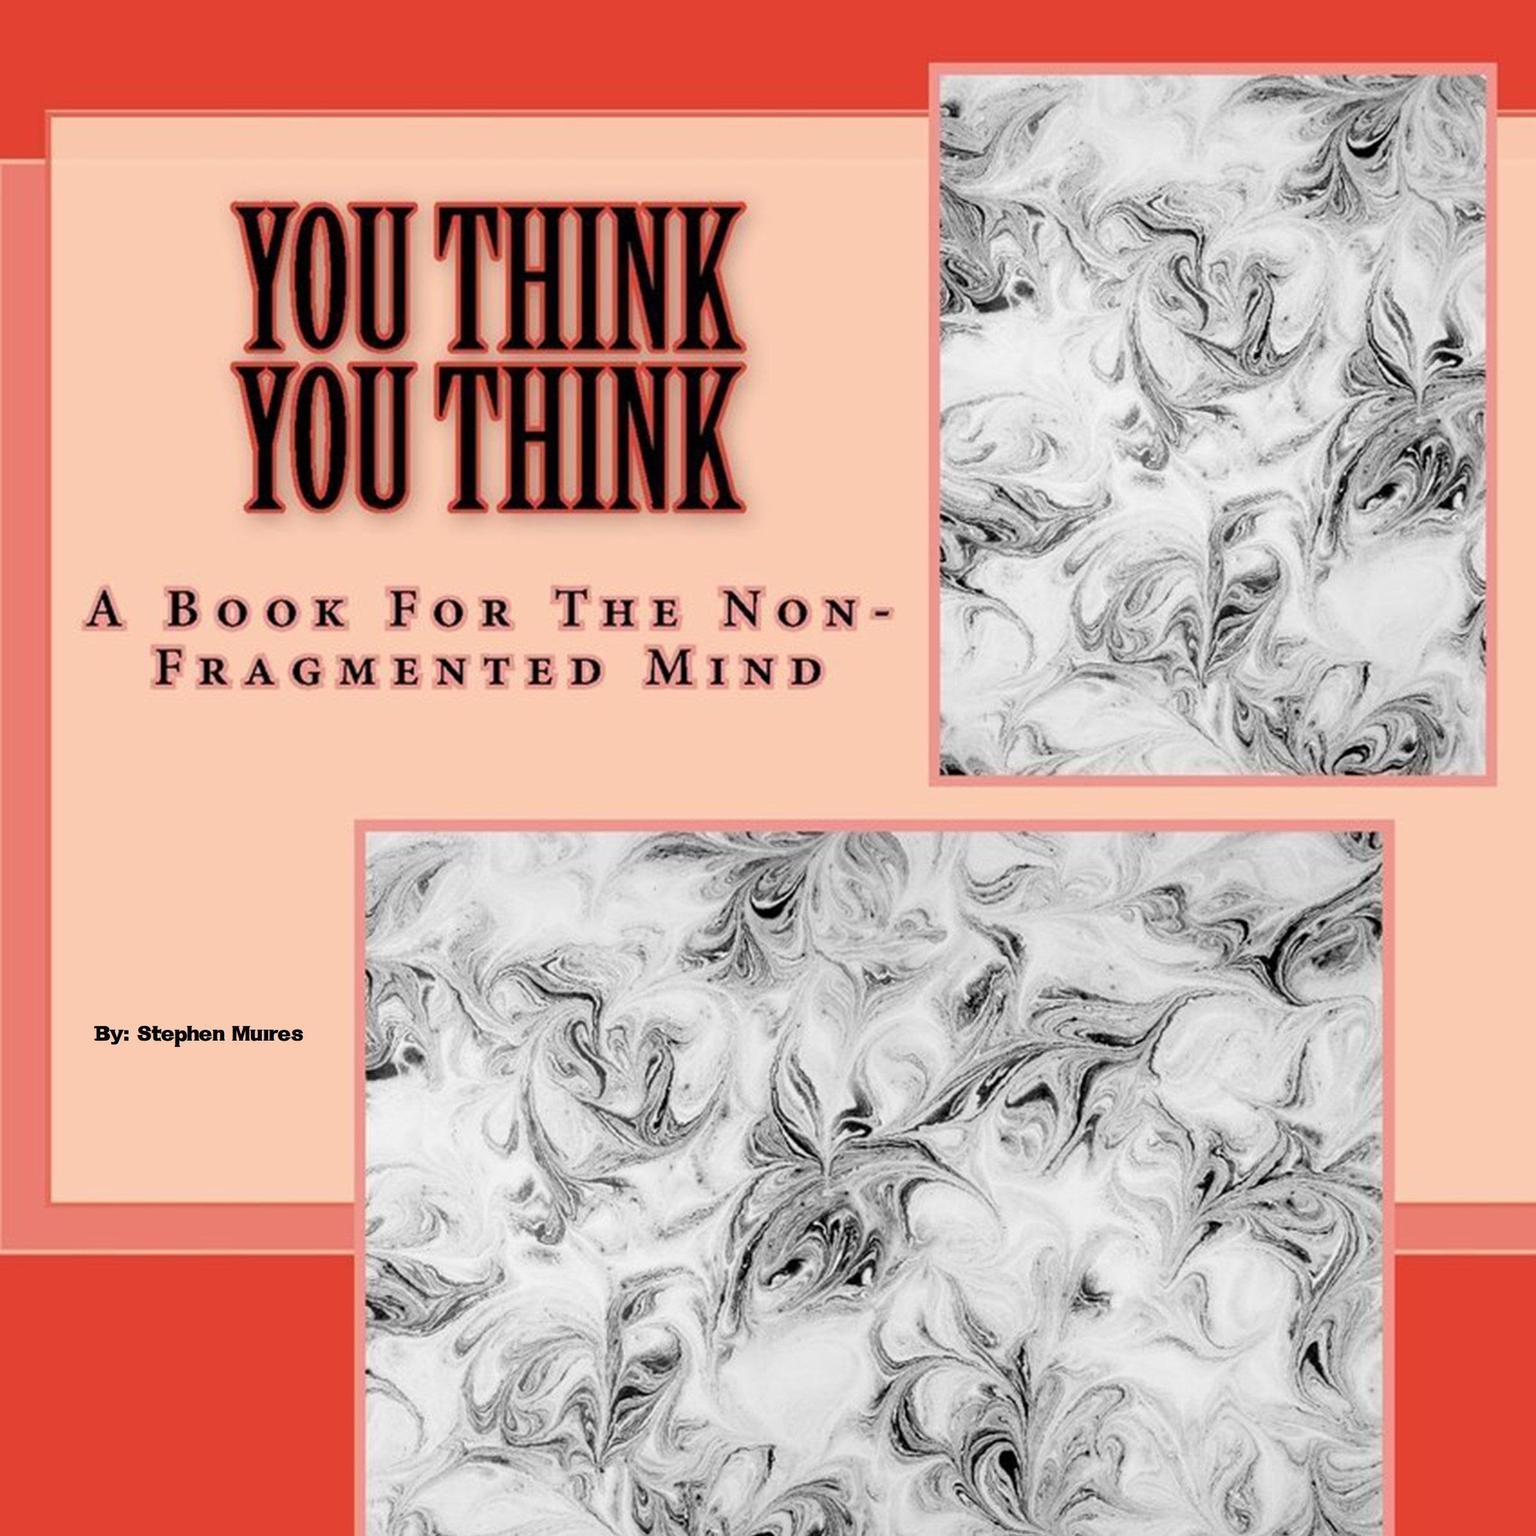 You Think You Think: A Book for the Non-Fragmented Mind Audiobook, by Stephen Muires